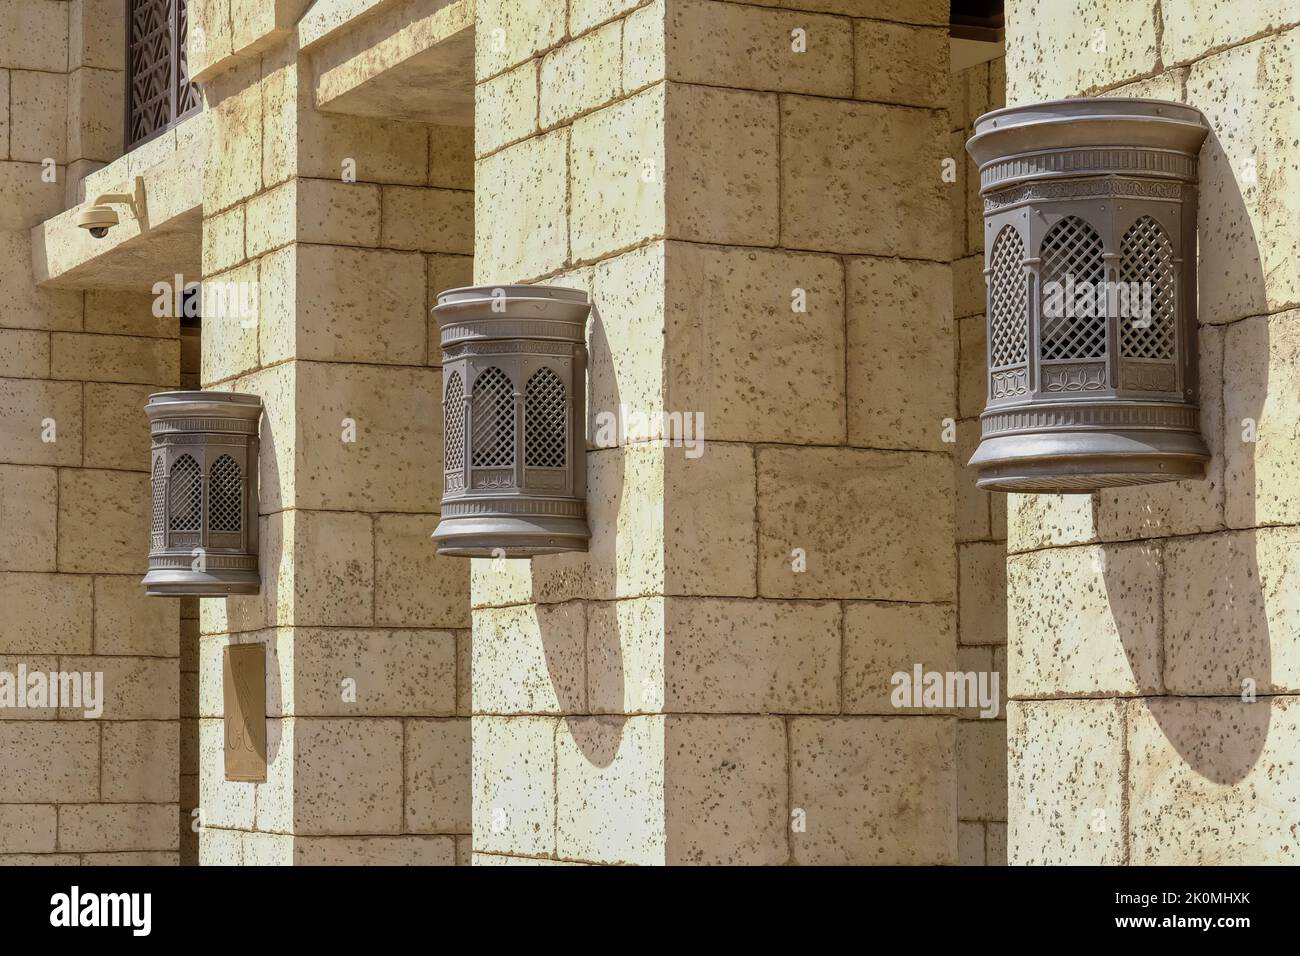 Vintage-style Arabic wall lamps and metal lanterns with traditional perforated orient design on villa or palace facades Stock Photo